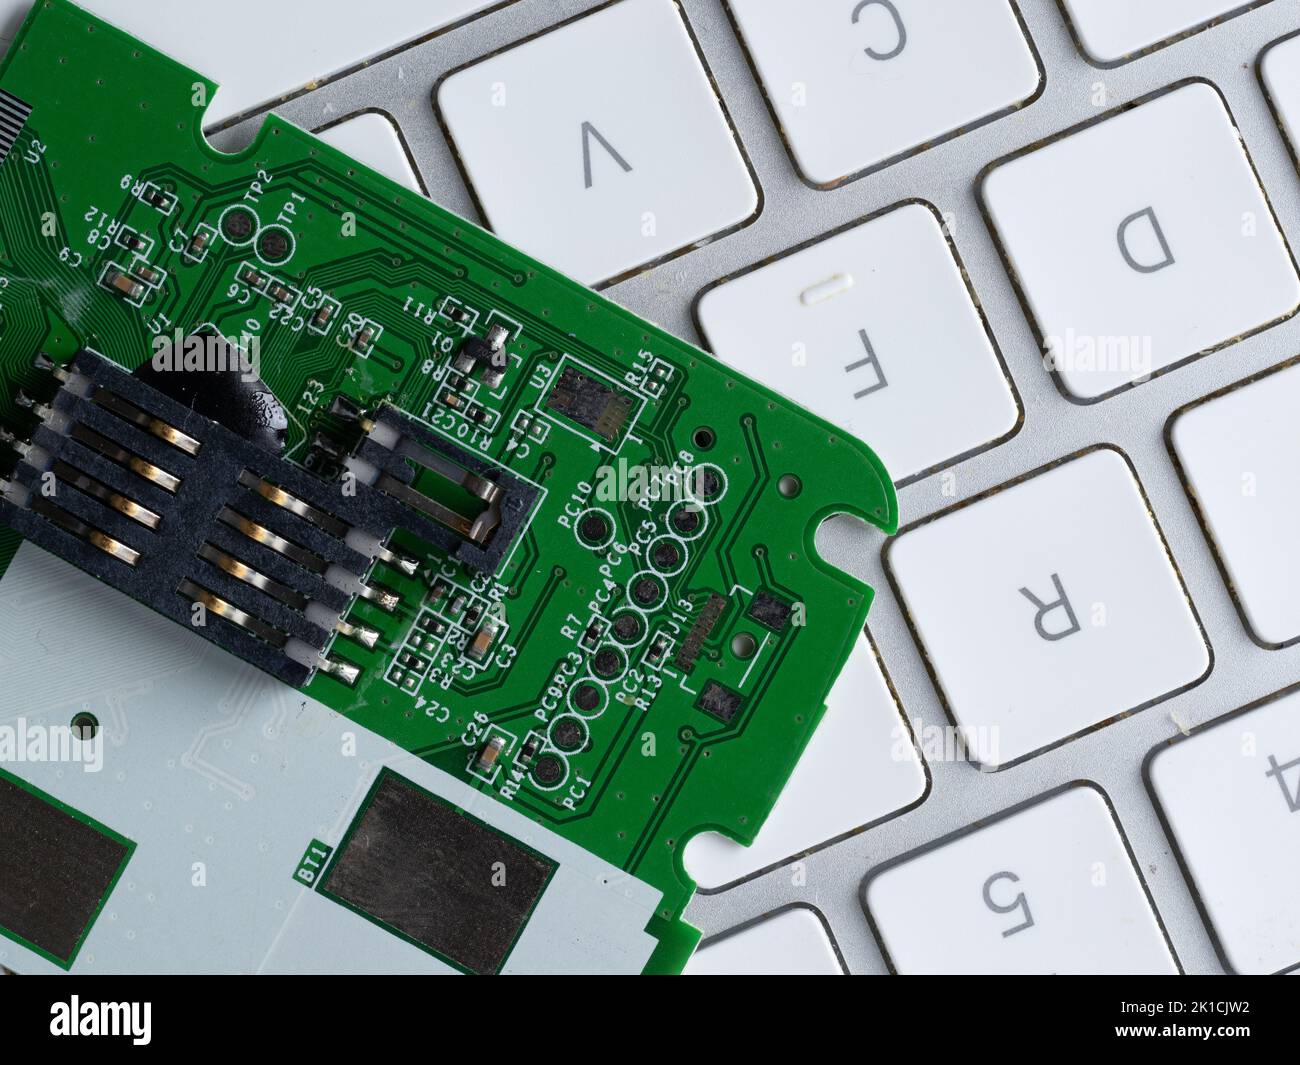 printed circuit board with resistors capacitors on a computer keyboard Stock Photo